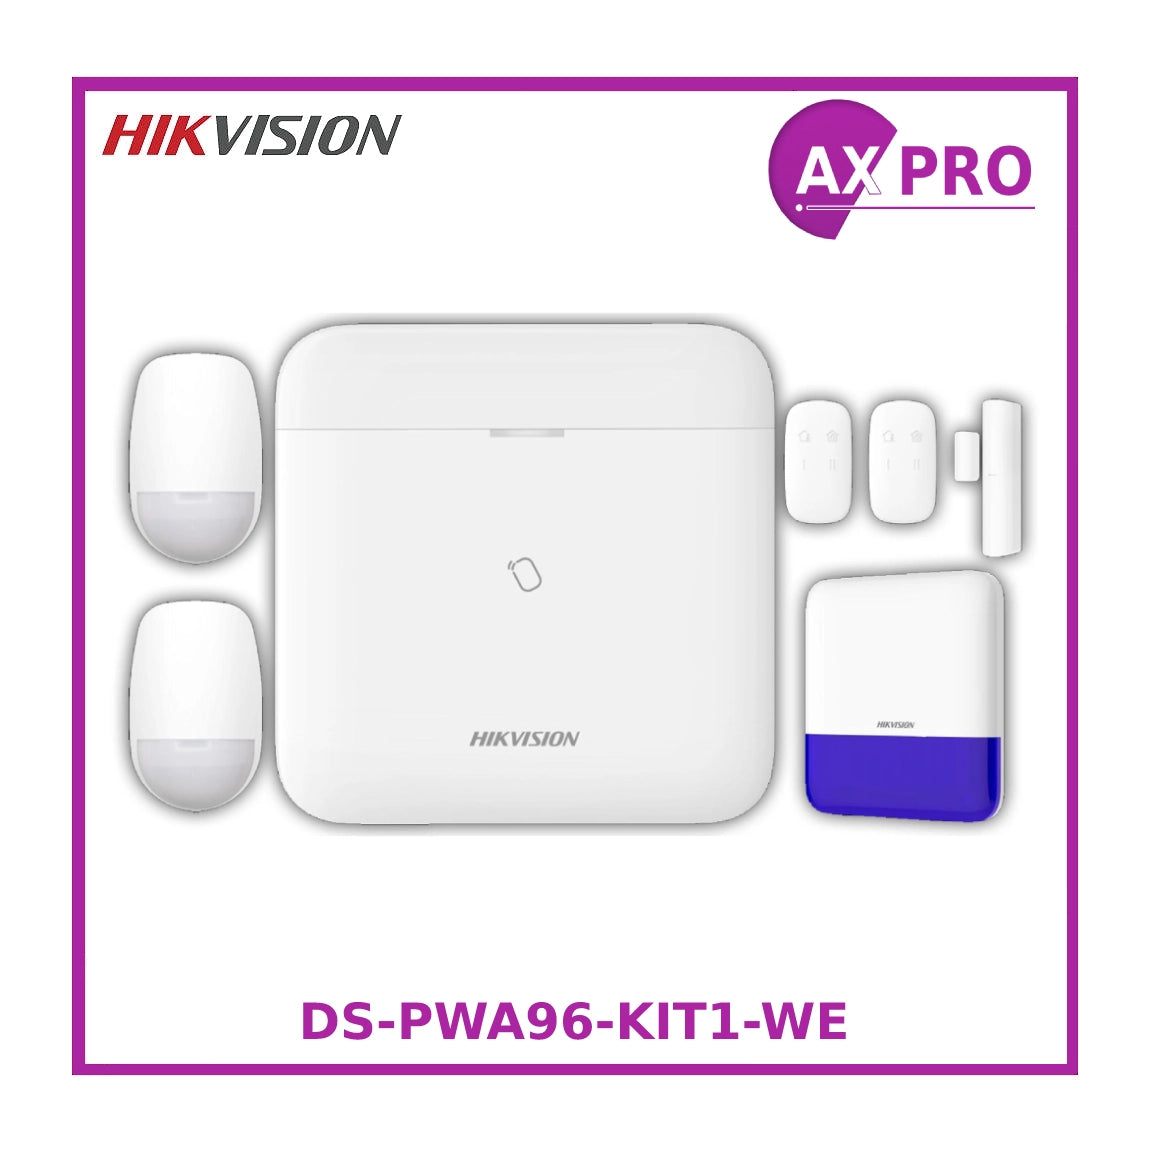 Hikvision AX PRO DS-PWA96-KIT1-WE Wireless Intruder Alarm Kit, up to 96 Wireless Zones/Outputs